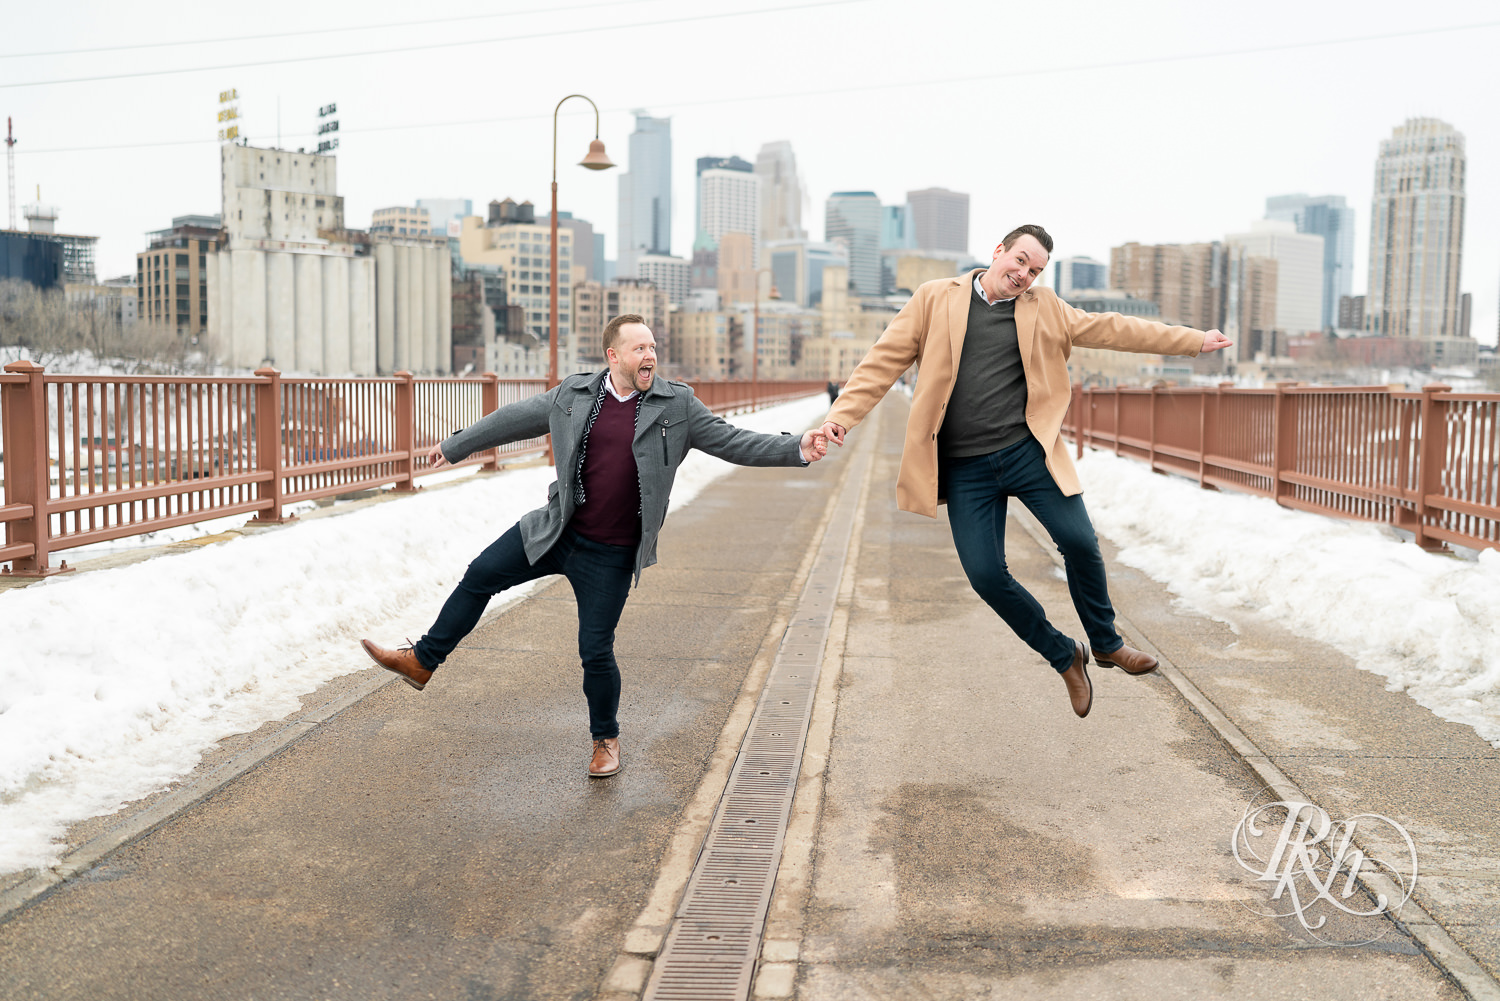 Gay men jump on the Stone Arch Bridge during the winter in Minneapolis, Minnesota.